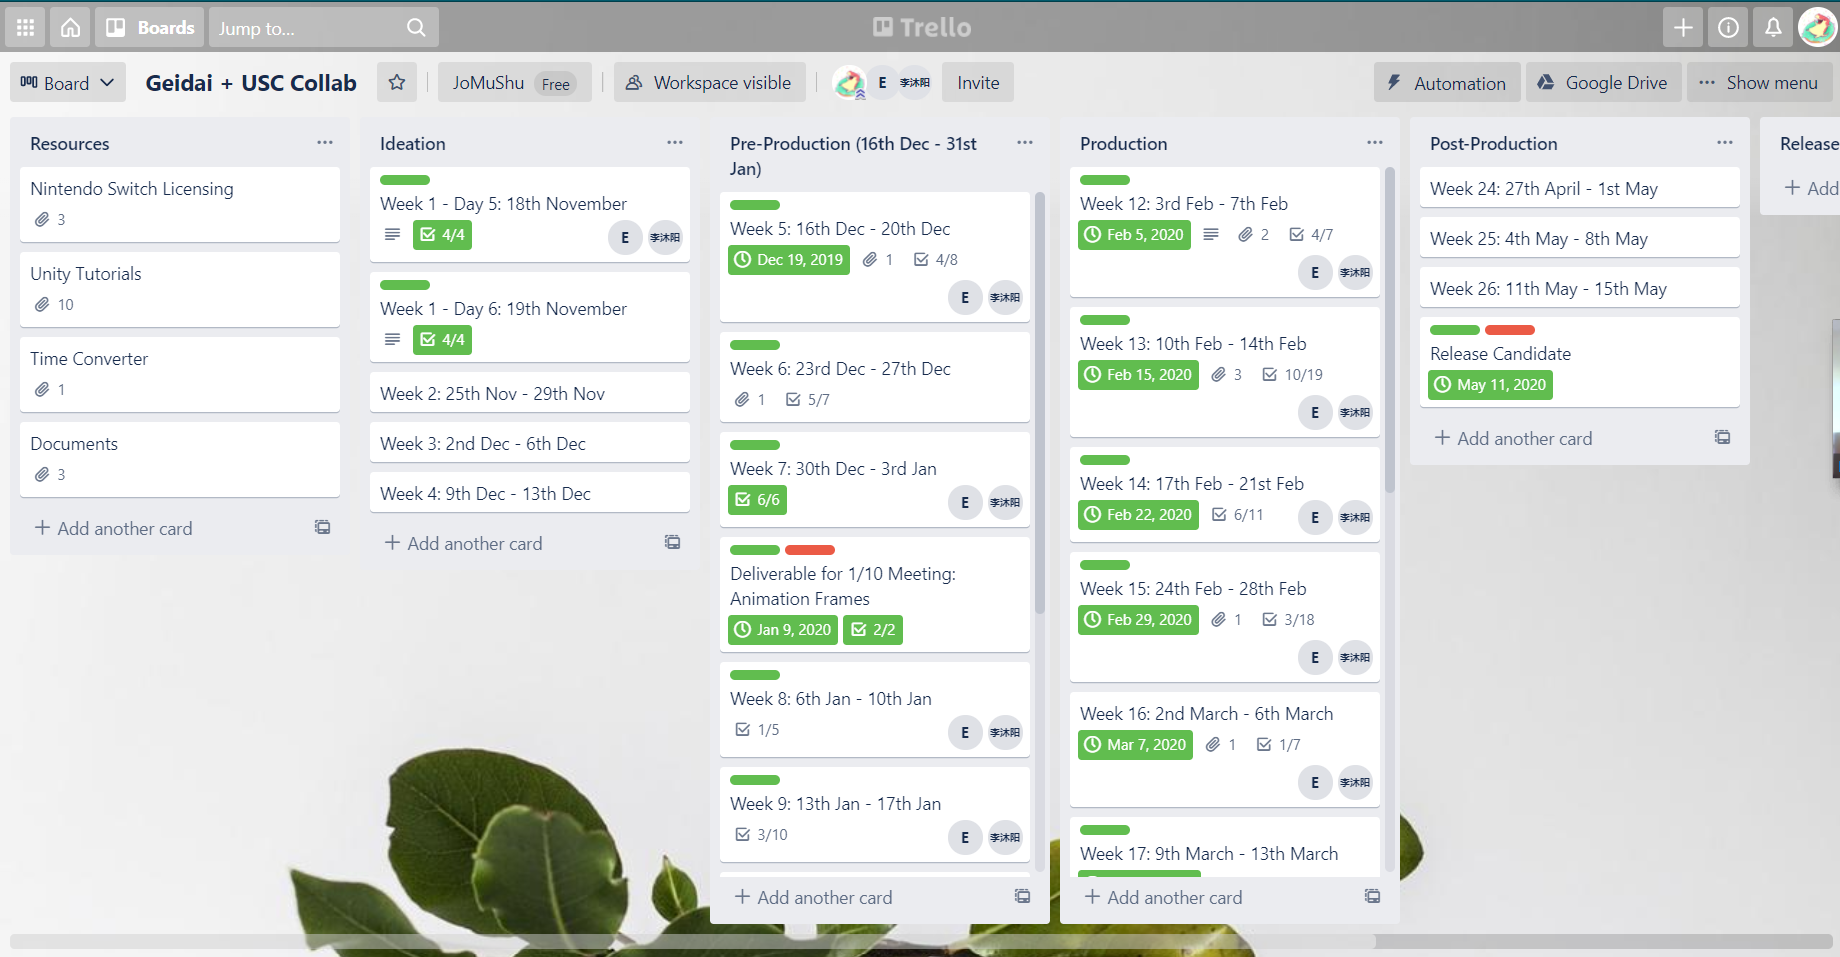  Trello board used to track tasks during Ideation, Pre-Production, Production, and Post-Production. 